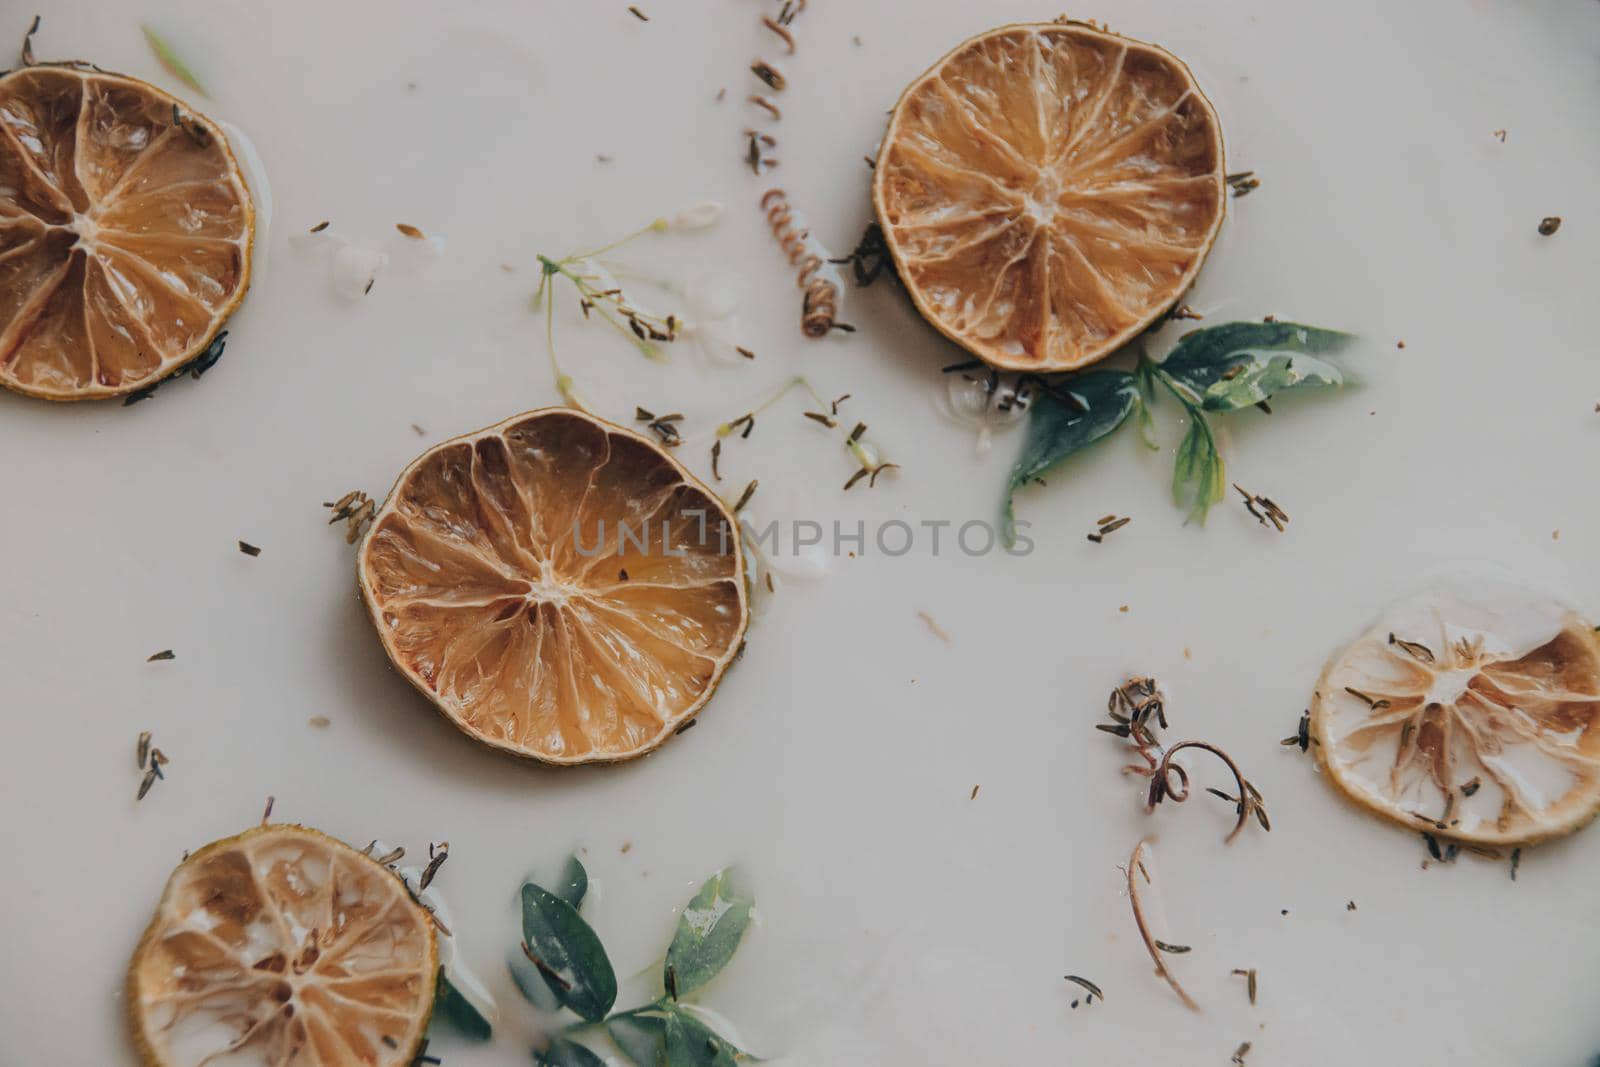 Therapeutic milk bath filled with dried lemon slices and other herbs for spa by Sonnet15